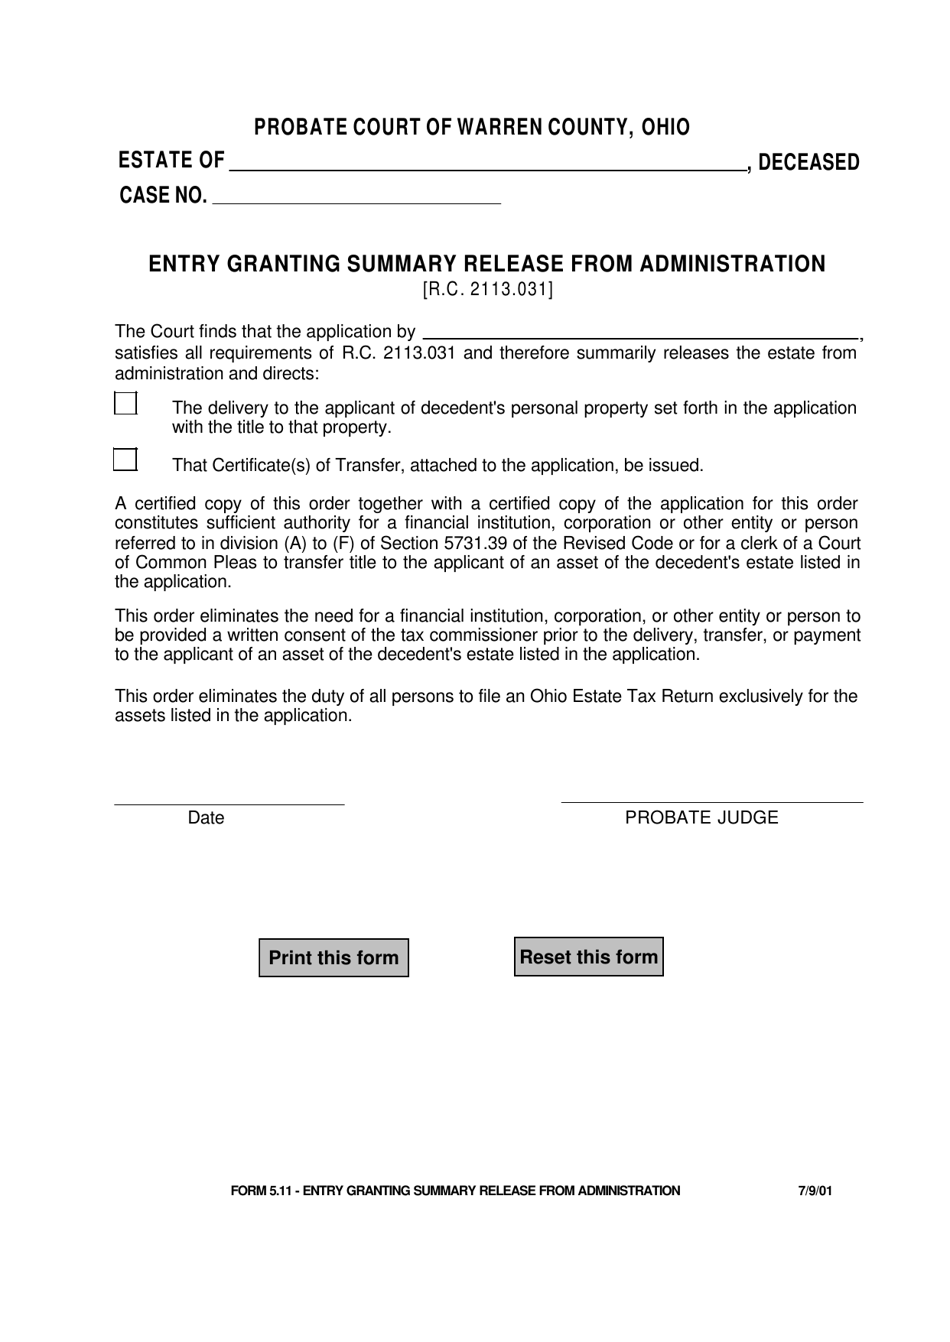 Form 5.11 Entry Granting Summary Release From Administration - Warren County, Ohio, Page 1